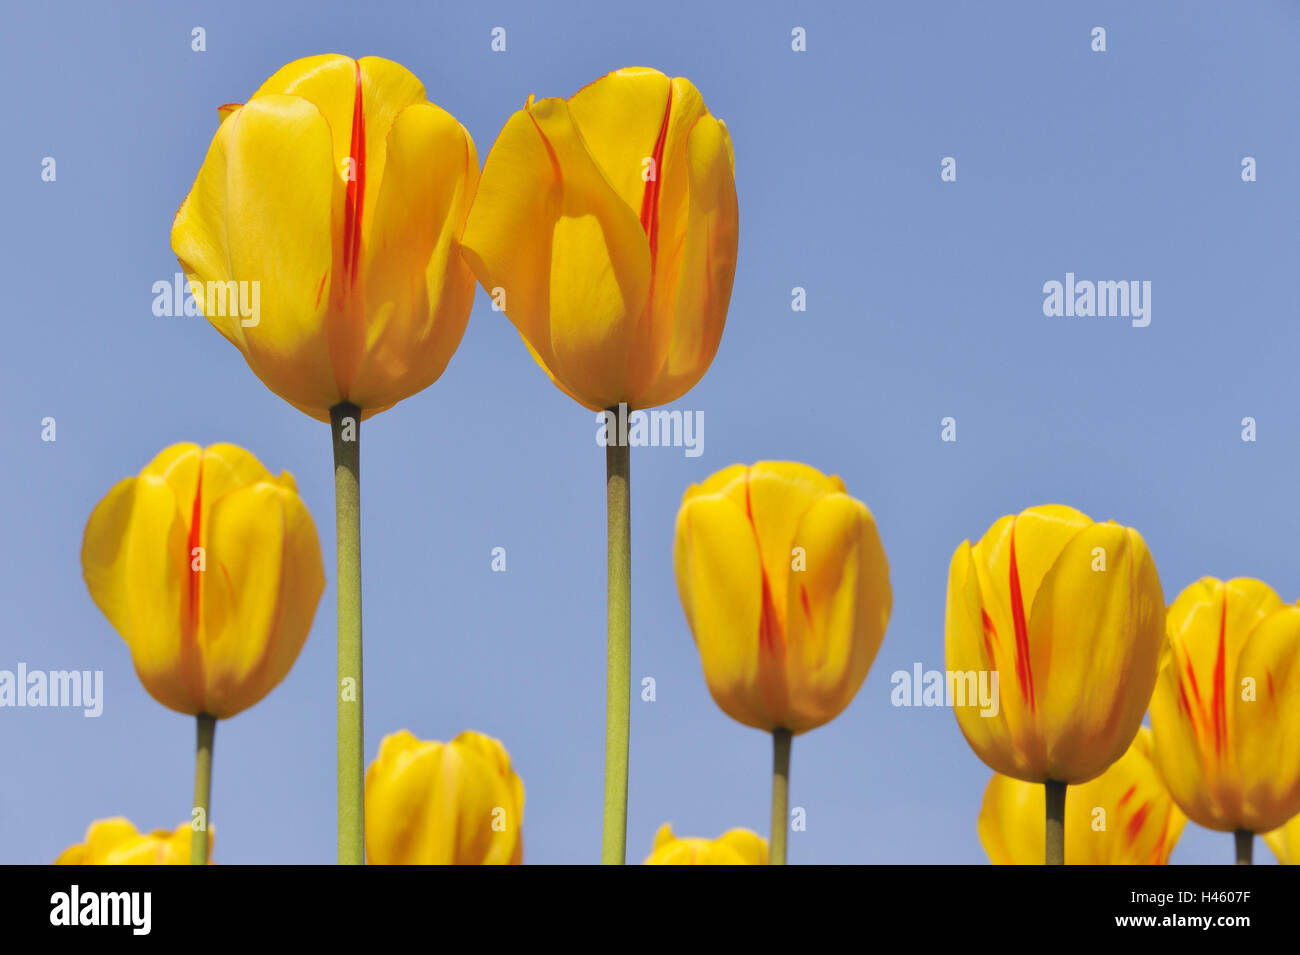 Garden tulips, Tulipa gesneriana, heaven, blue, garden tulips, tulips, lily plants, flowers, spring flowers, tulip blossoms, blossoms, petals, yellow, red, blossom, blossom, stalk, botany, detail, flora, cut out, nature, sunshine, Stock Photo